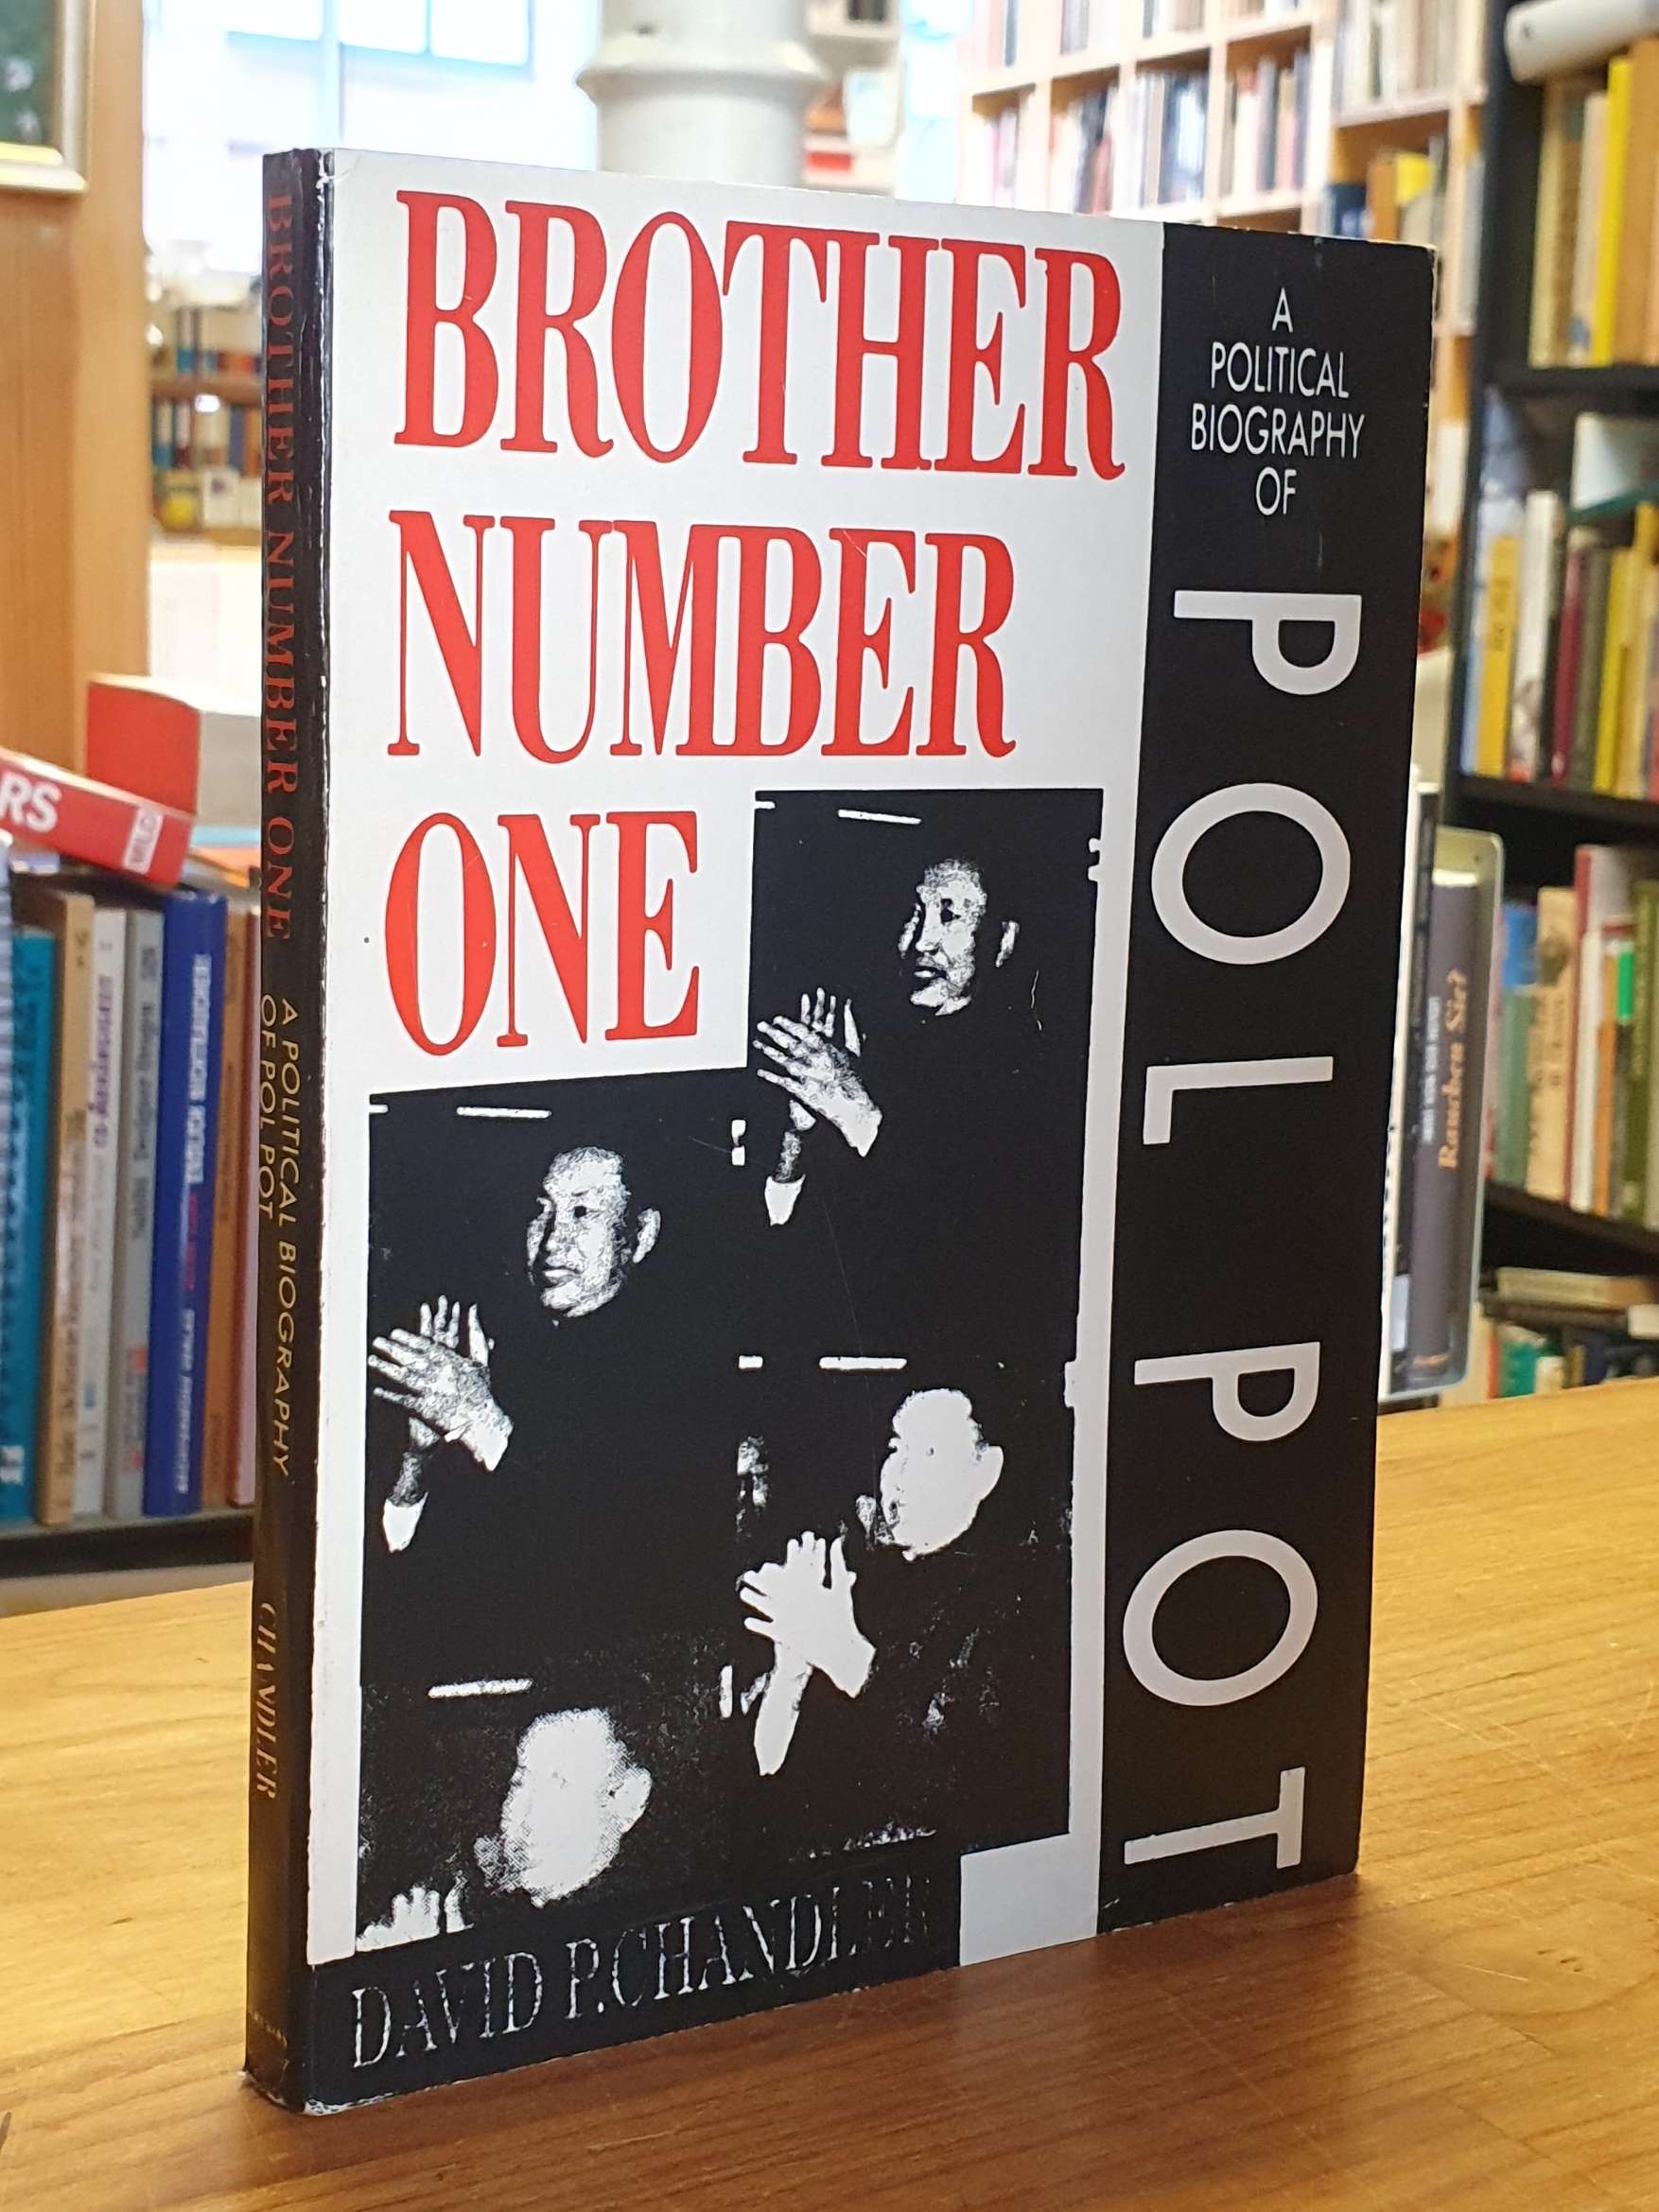 Brother Number One - A Political Biography of Pol Pot, - Kambodscha, David P. Chandler,